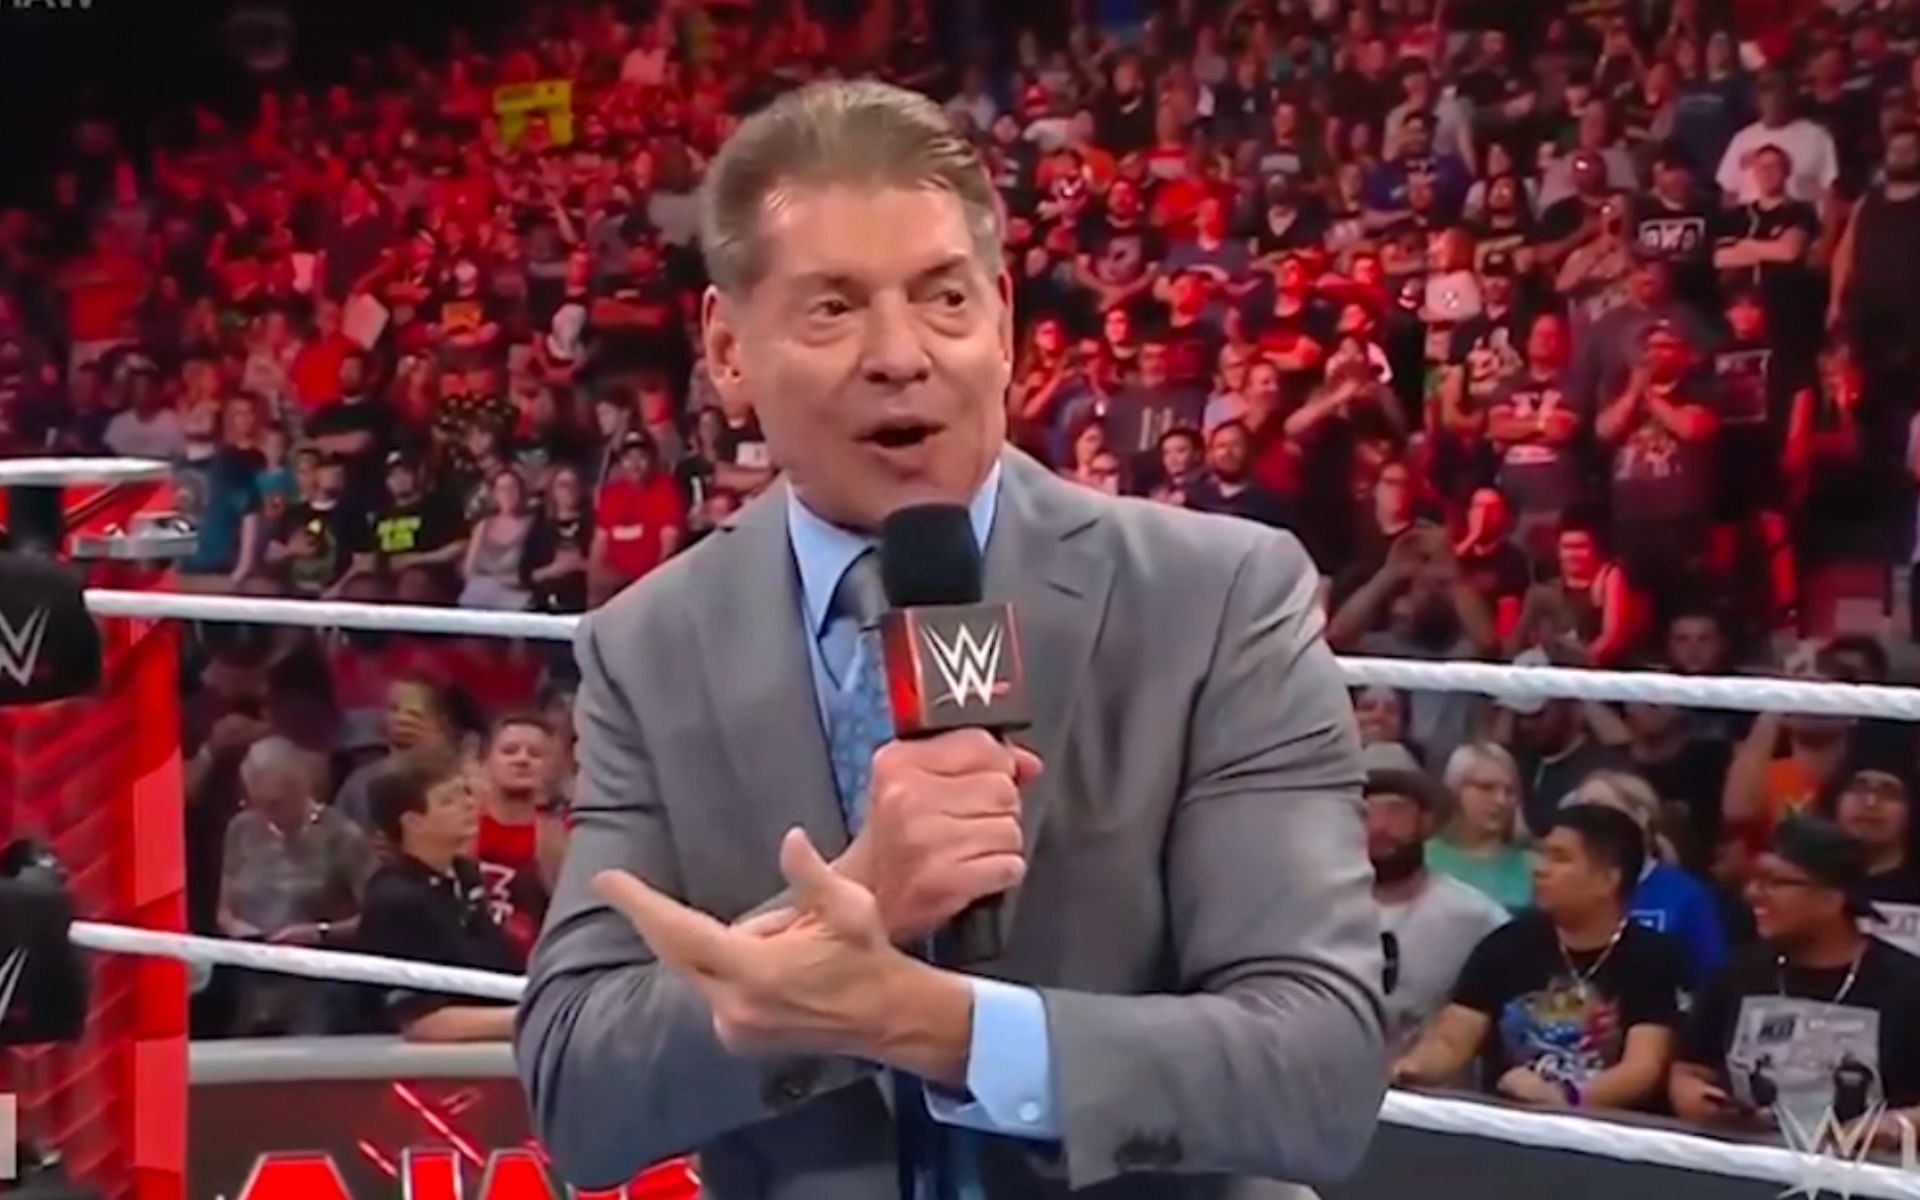 The former CEO and Chairman of WWE stepped down after four decades in charge